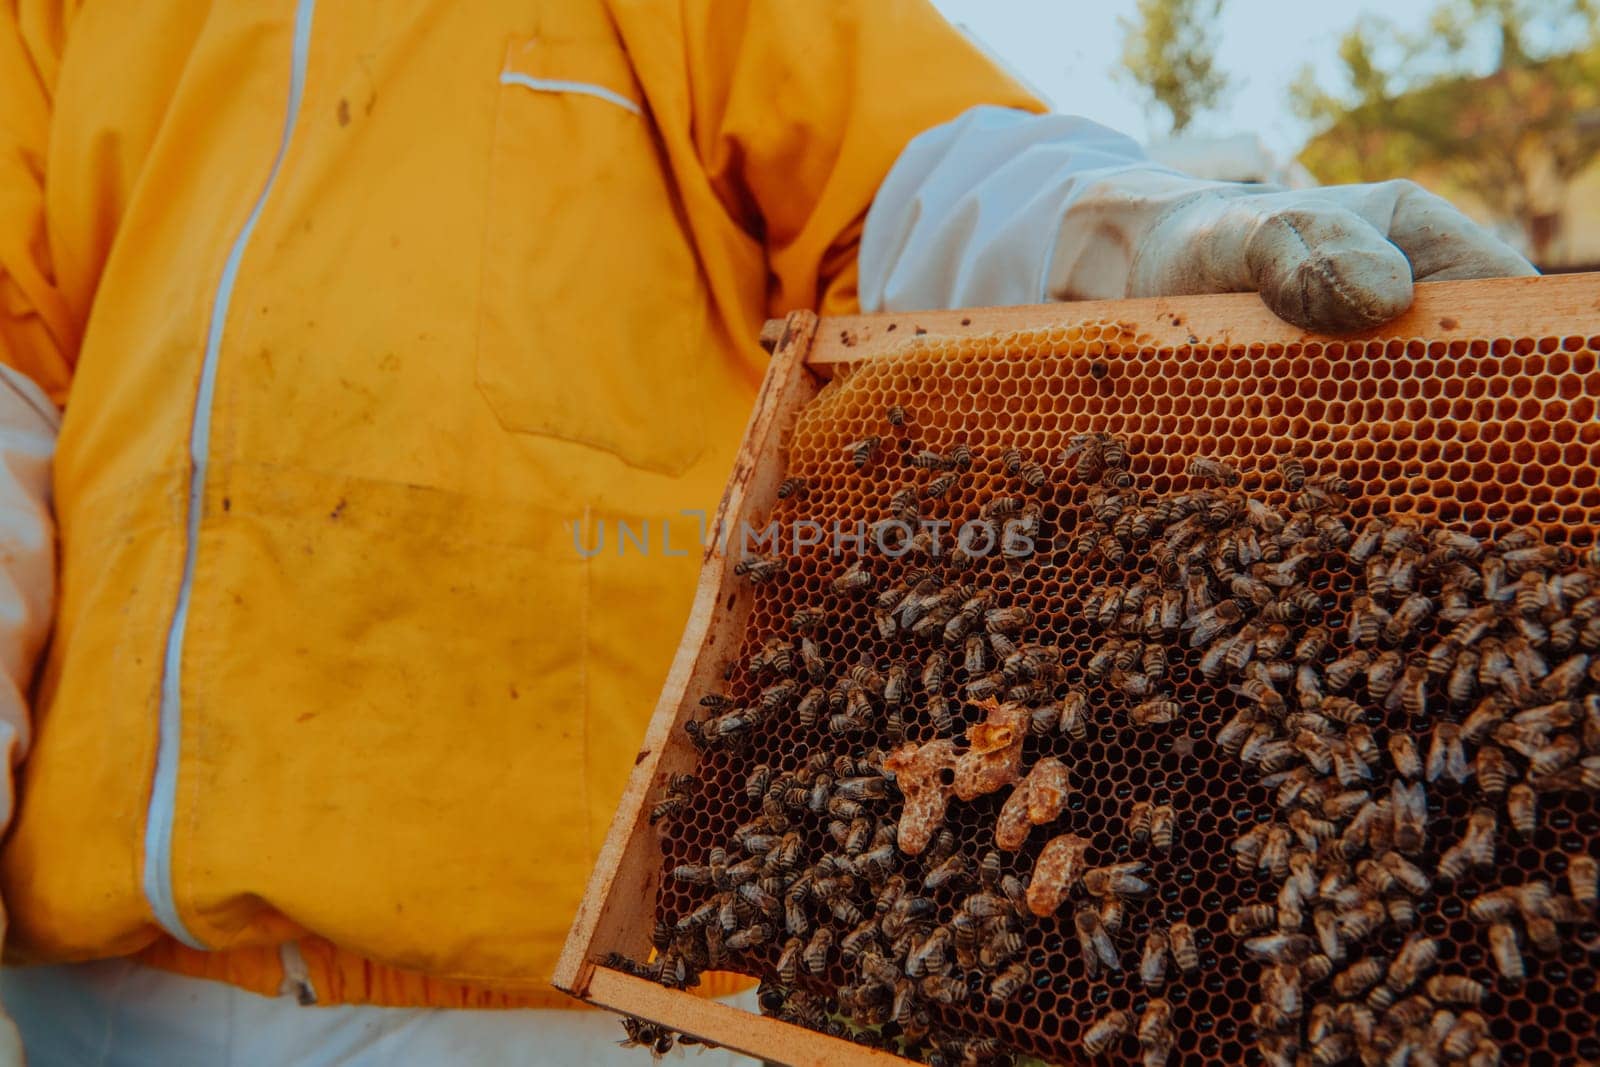 The beekeeper checks the queens for the honeycomb. Beekeepers check honey quality and honey parasites. A beekeeper works with bees and beehives in an apiary.